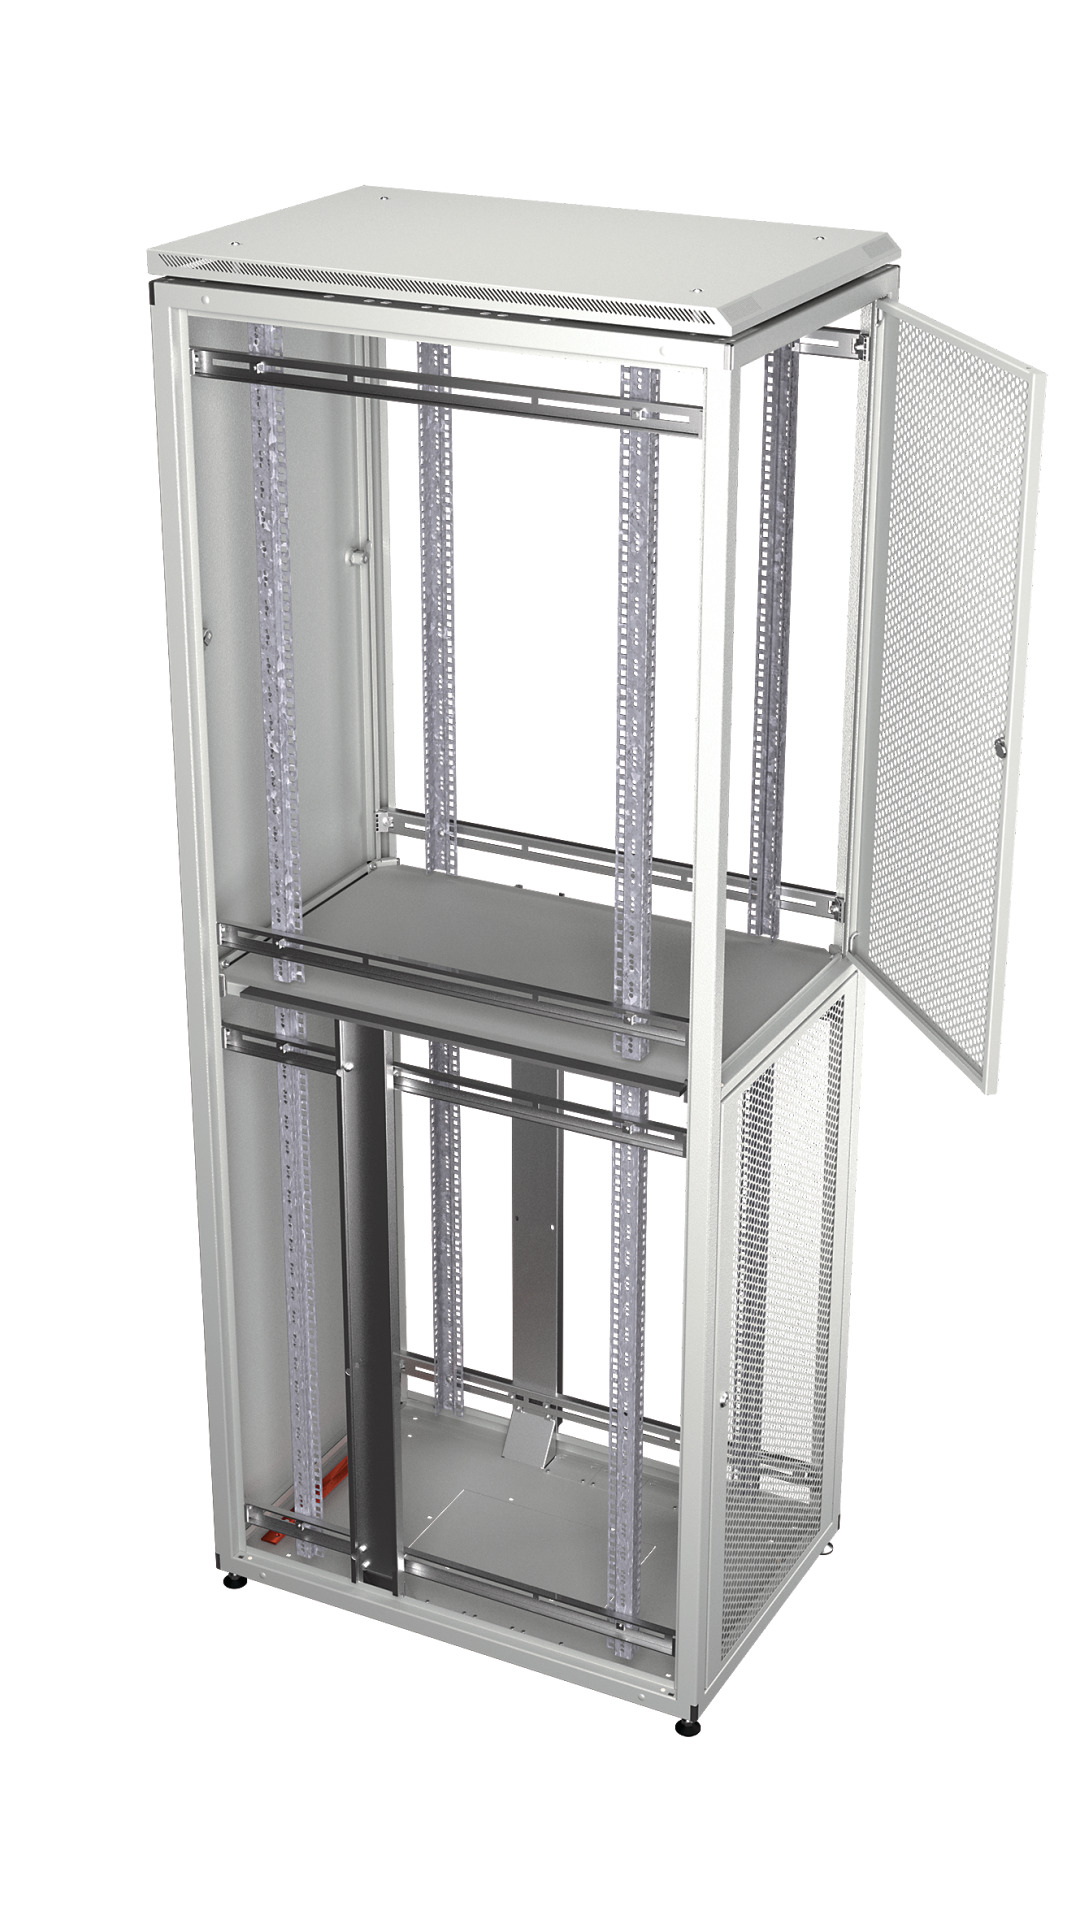 Co-Location Rack PRO, 1x23+2x11HE, 600x1000 mm, F+R 1-tlg. perforiert, RAL7035